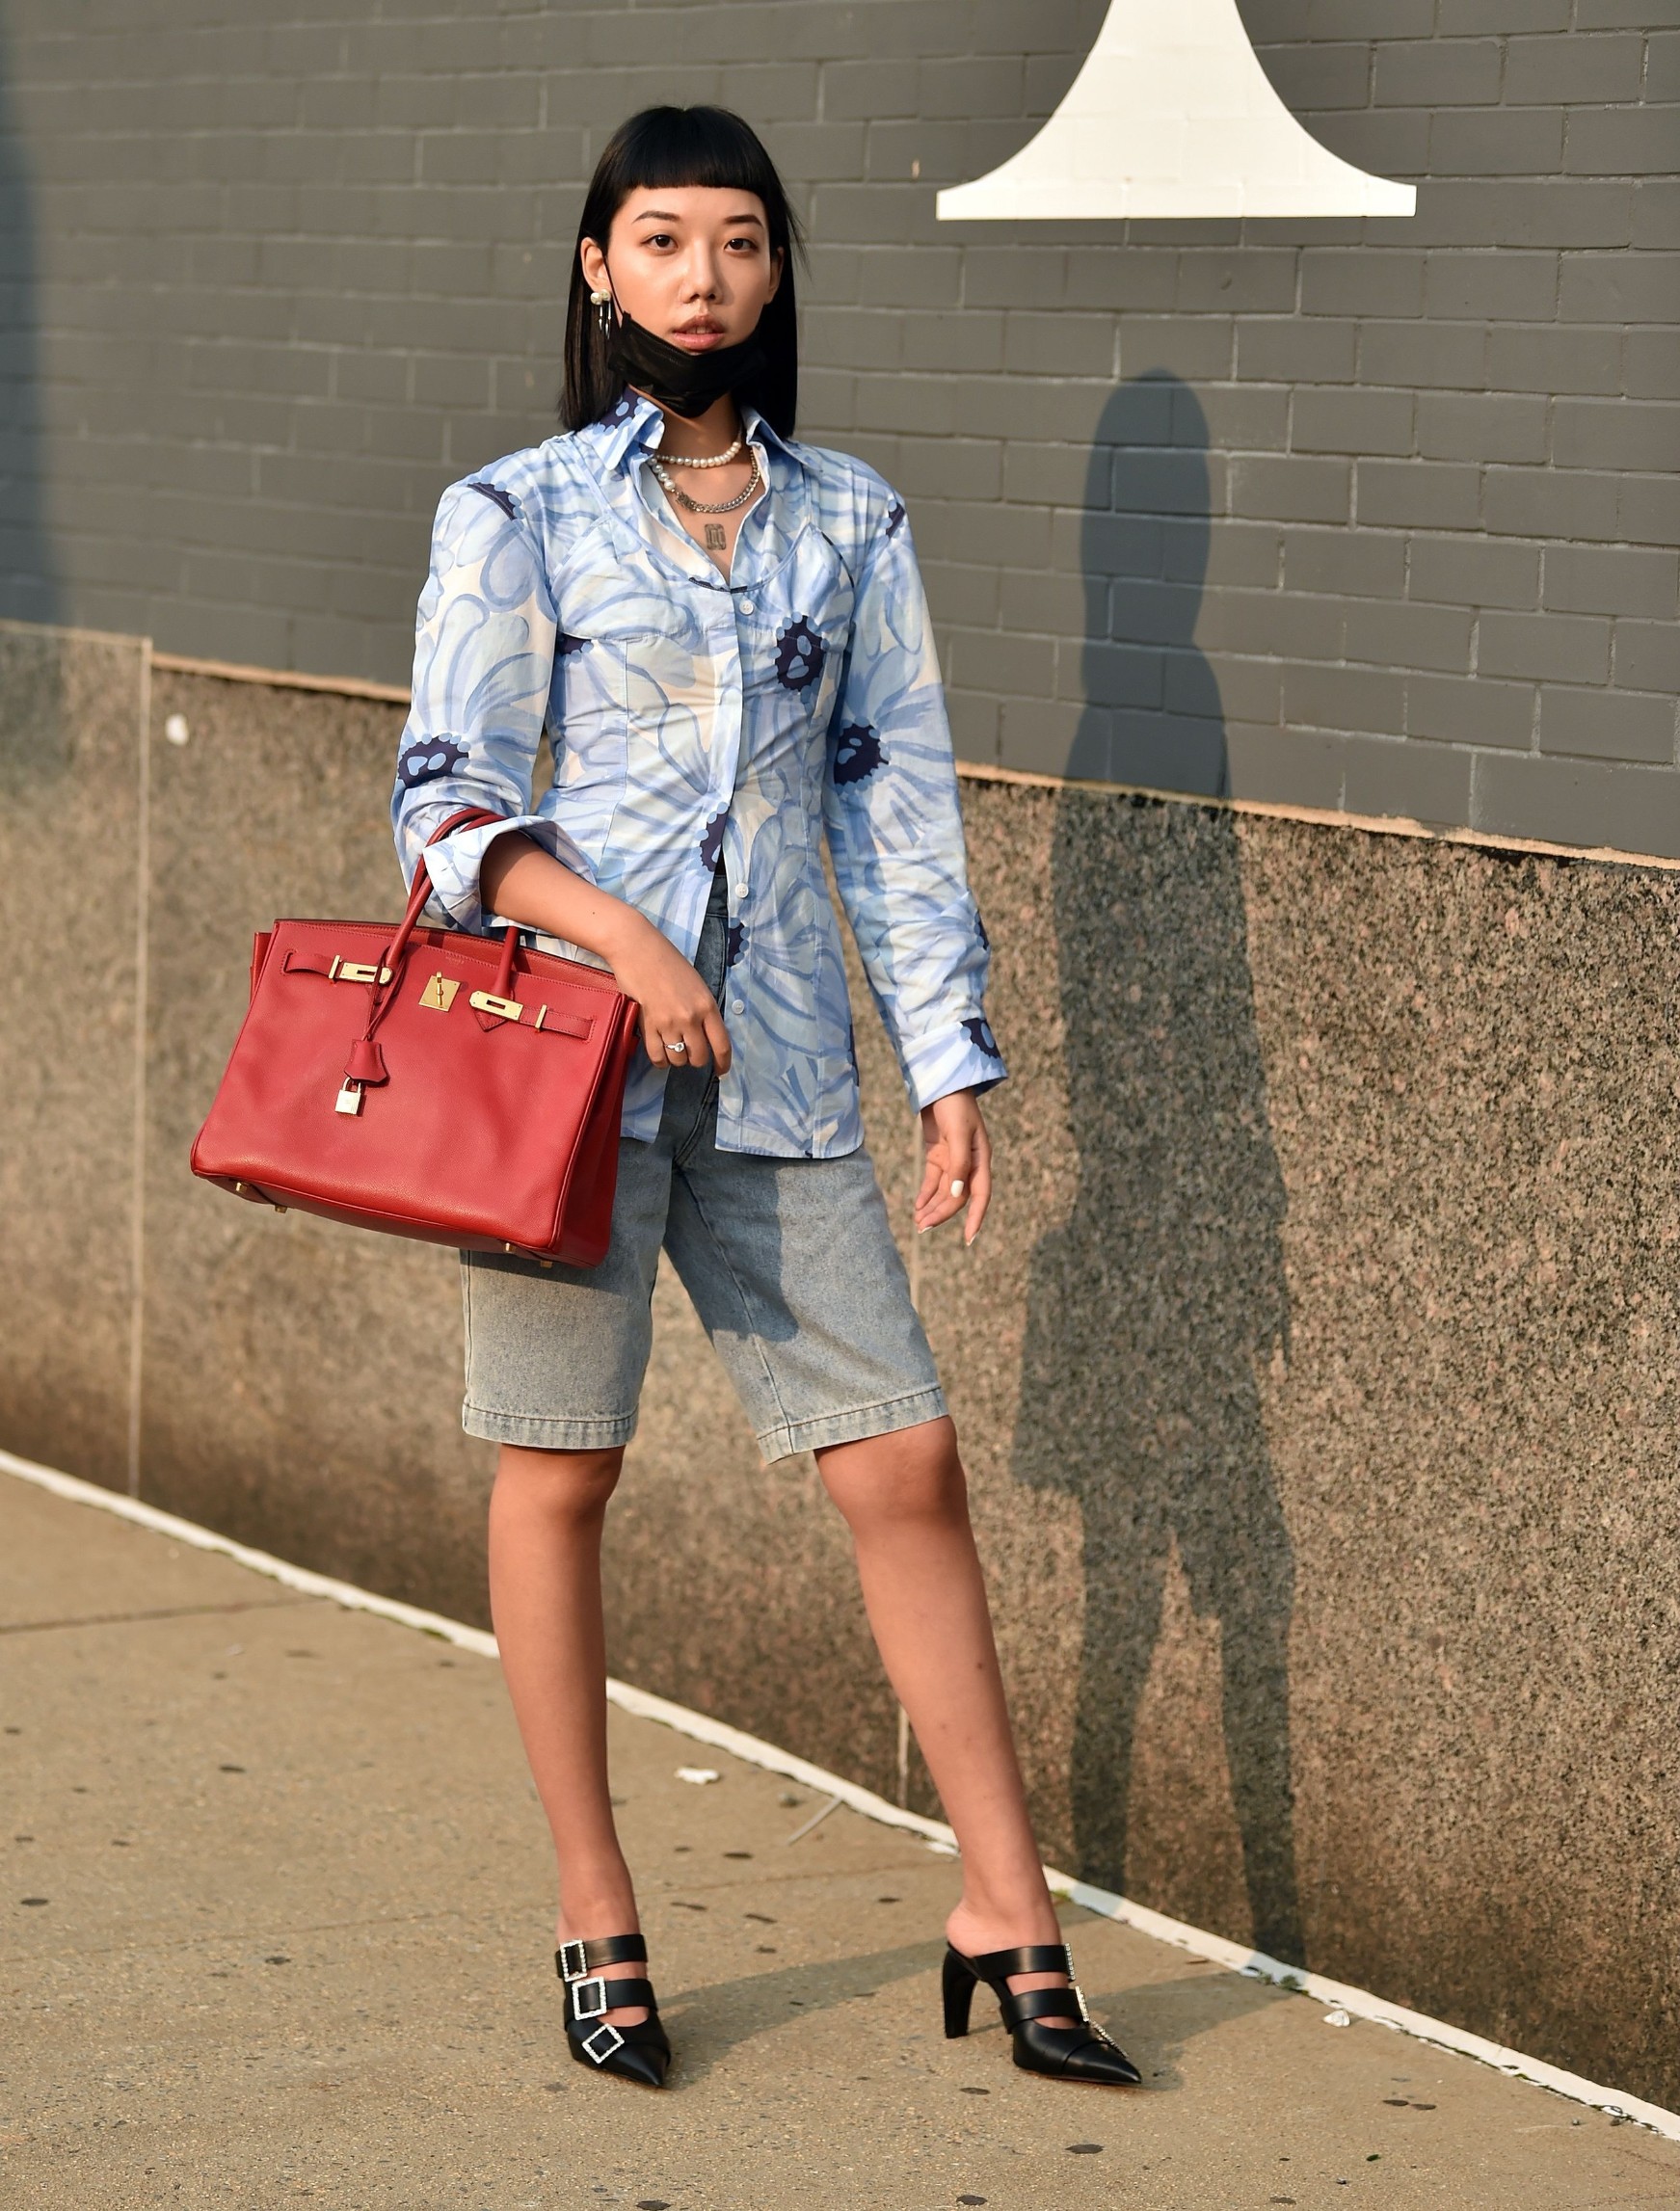 An attendee at NYFW 2020 street fashion outside Rebecca Minkoff
Street Style, Spring Summer 2021, New York Fashion Week, USA - 15 Sep 2020,Image: 558178972, License: Rights-managed, Restrictions: , Model Release: no, Credit line: Stephen Lovekin / Shutterstock Editorial / Profimedia